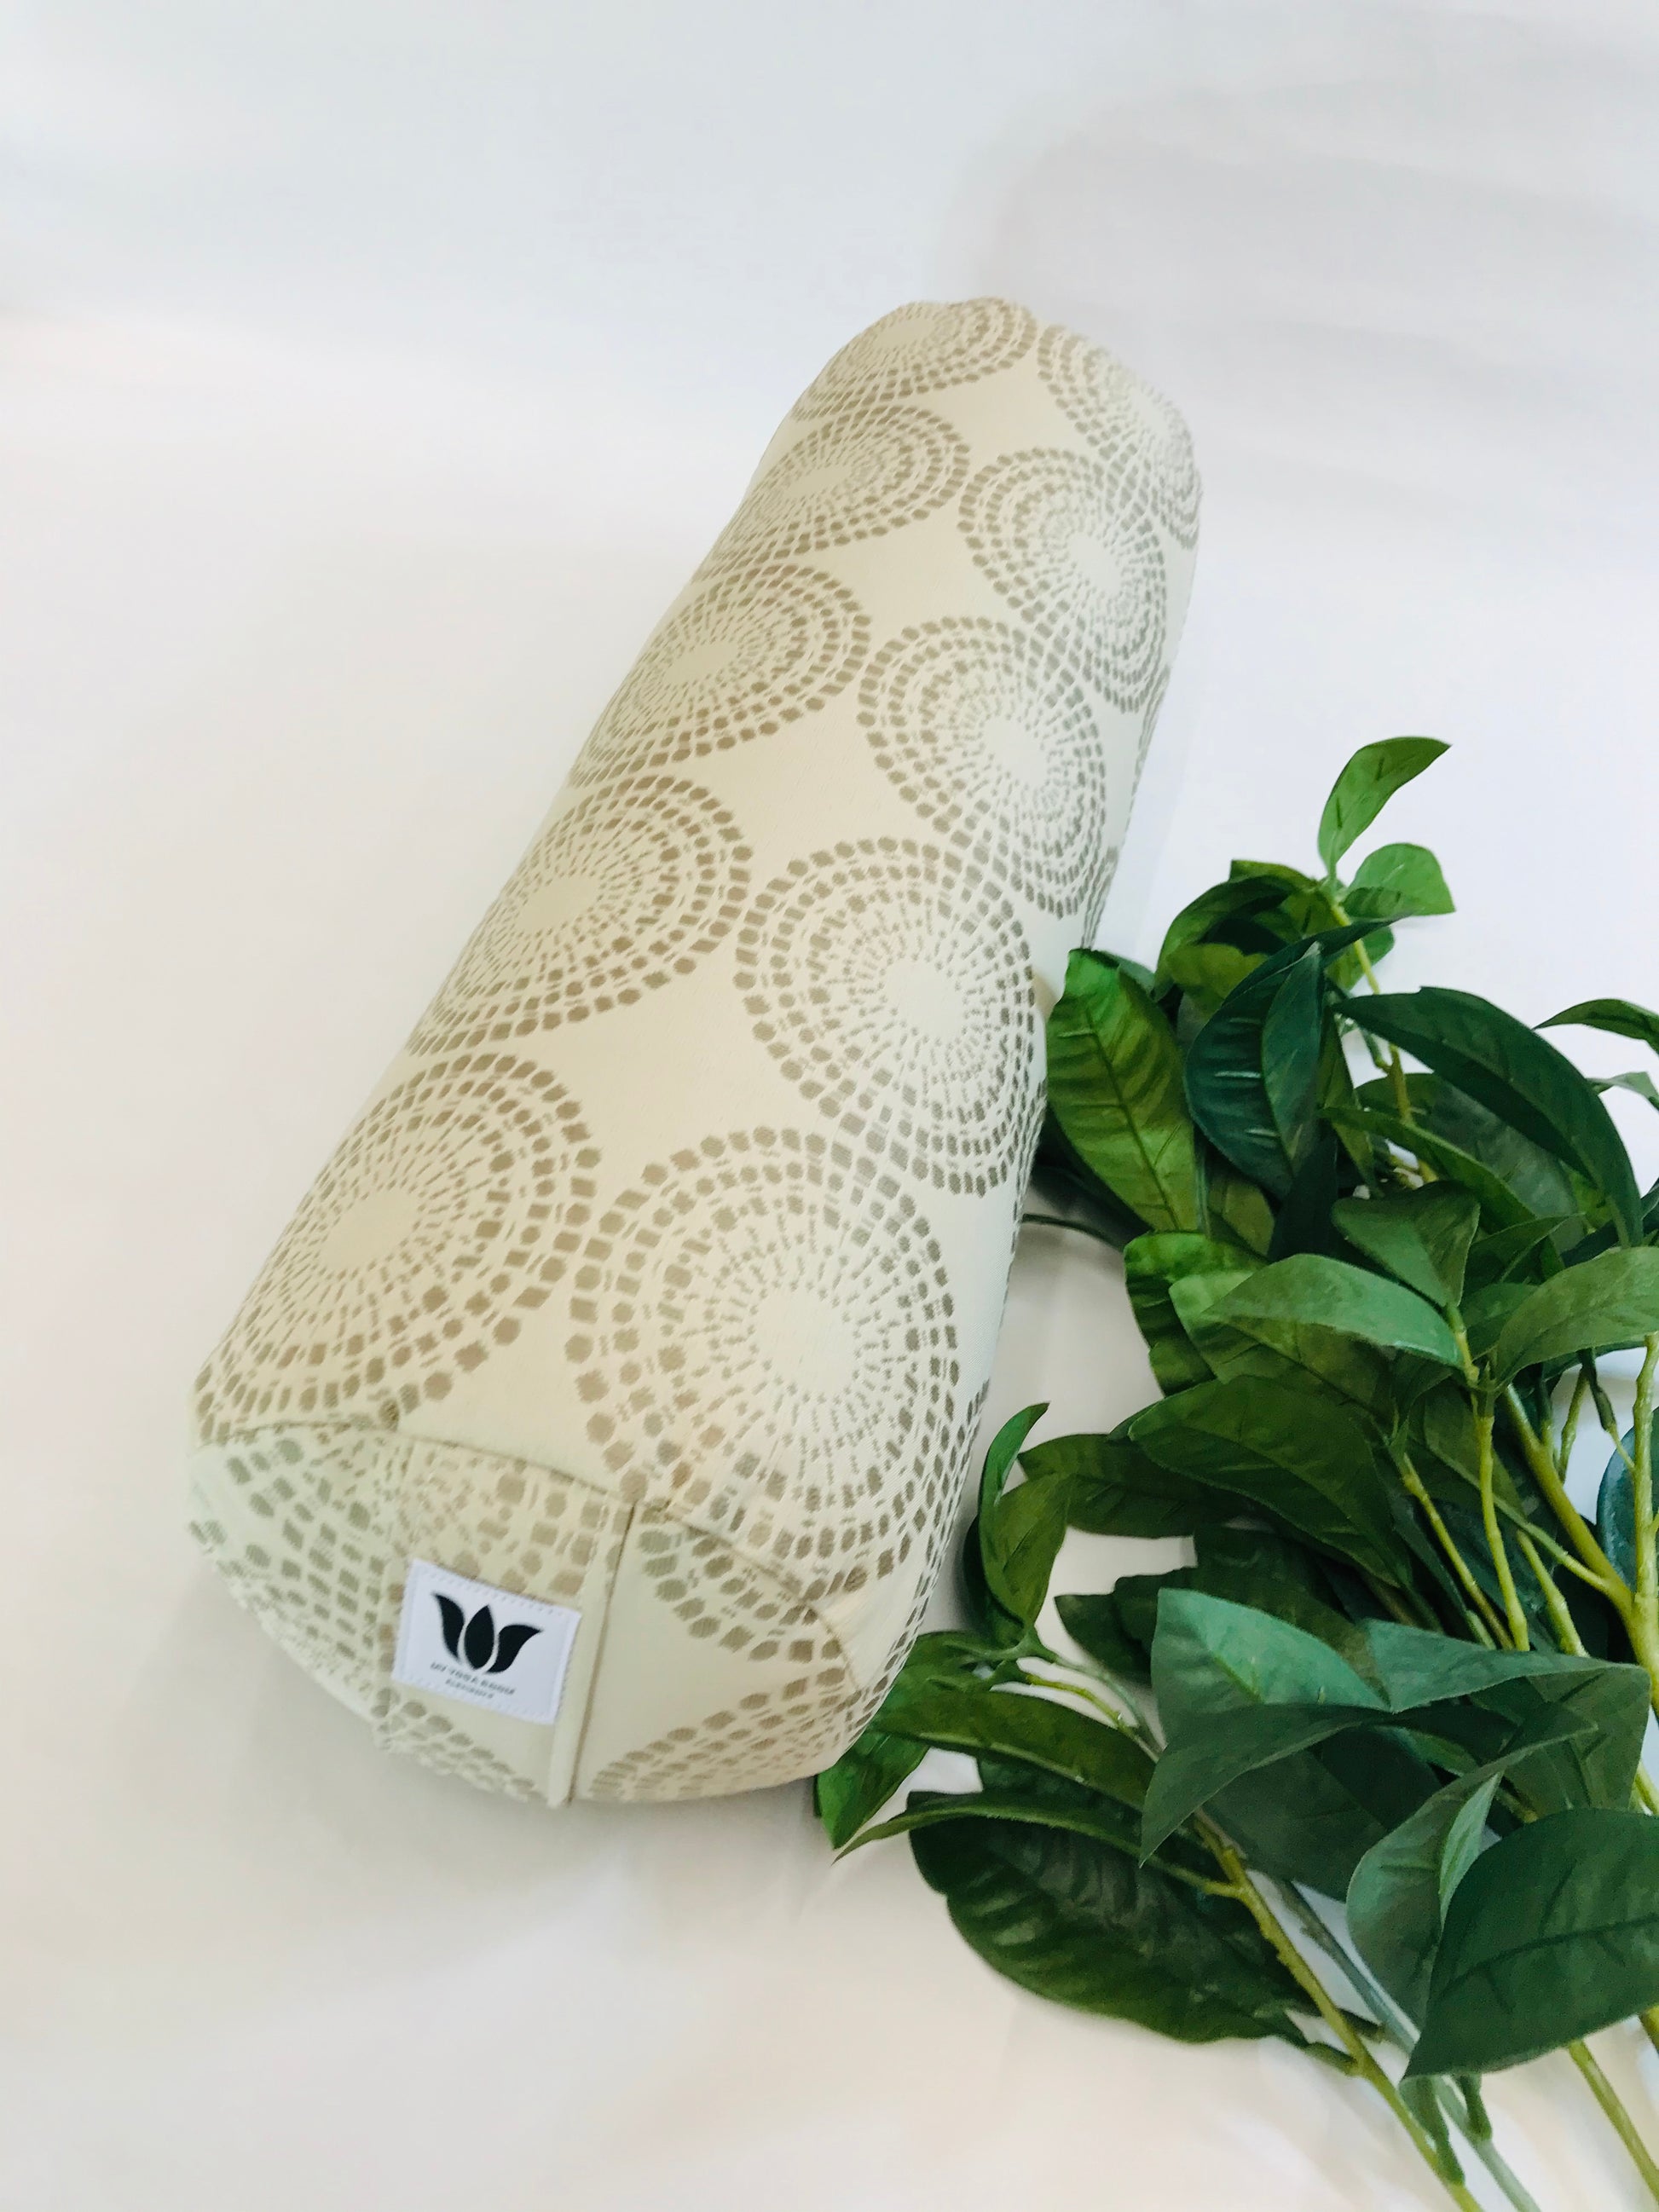 Round Yoga Bolster, made in canada by yoga teacher